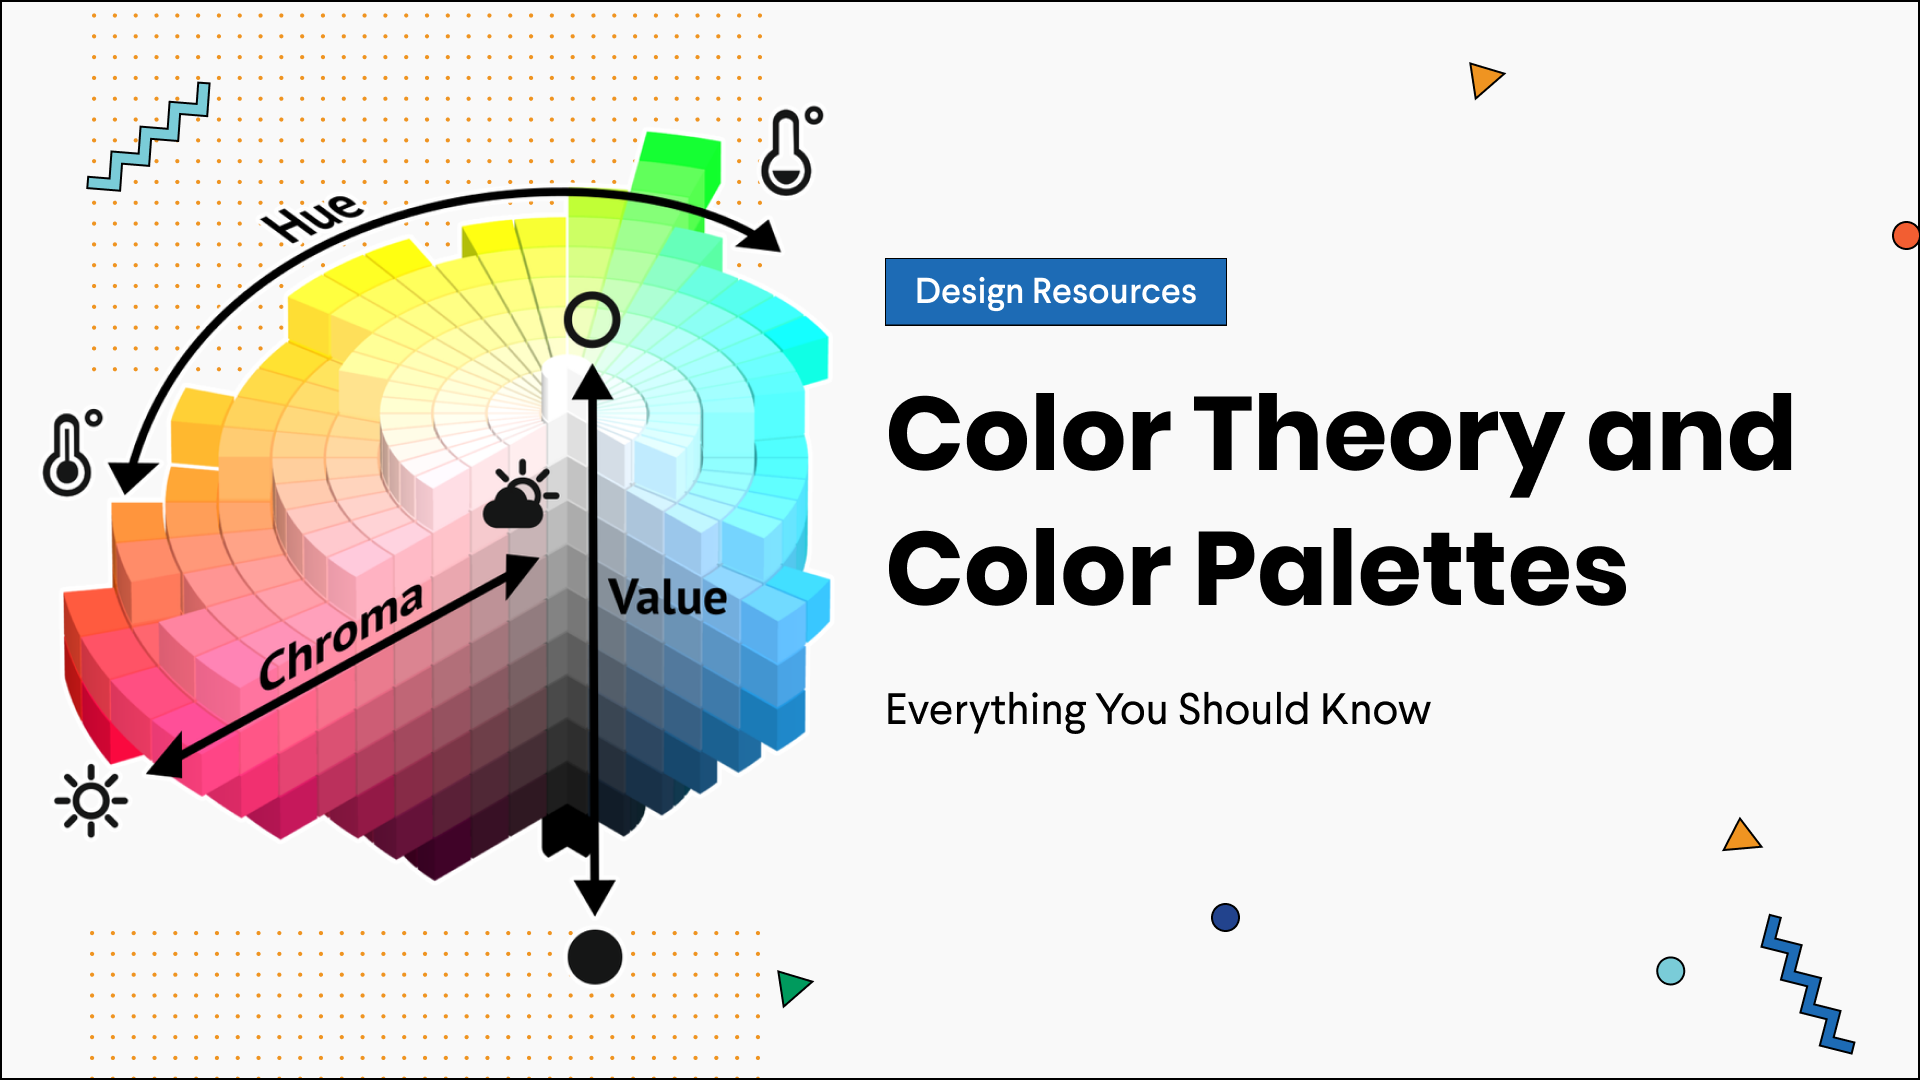 https://govisually.com/wp-content/uploads/2020/10/GV_Blog_Color-Theory-and-Color-Palette.png